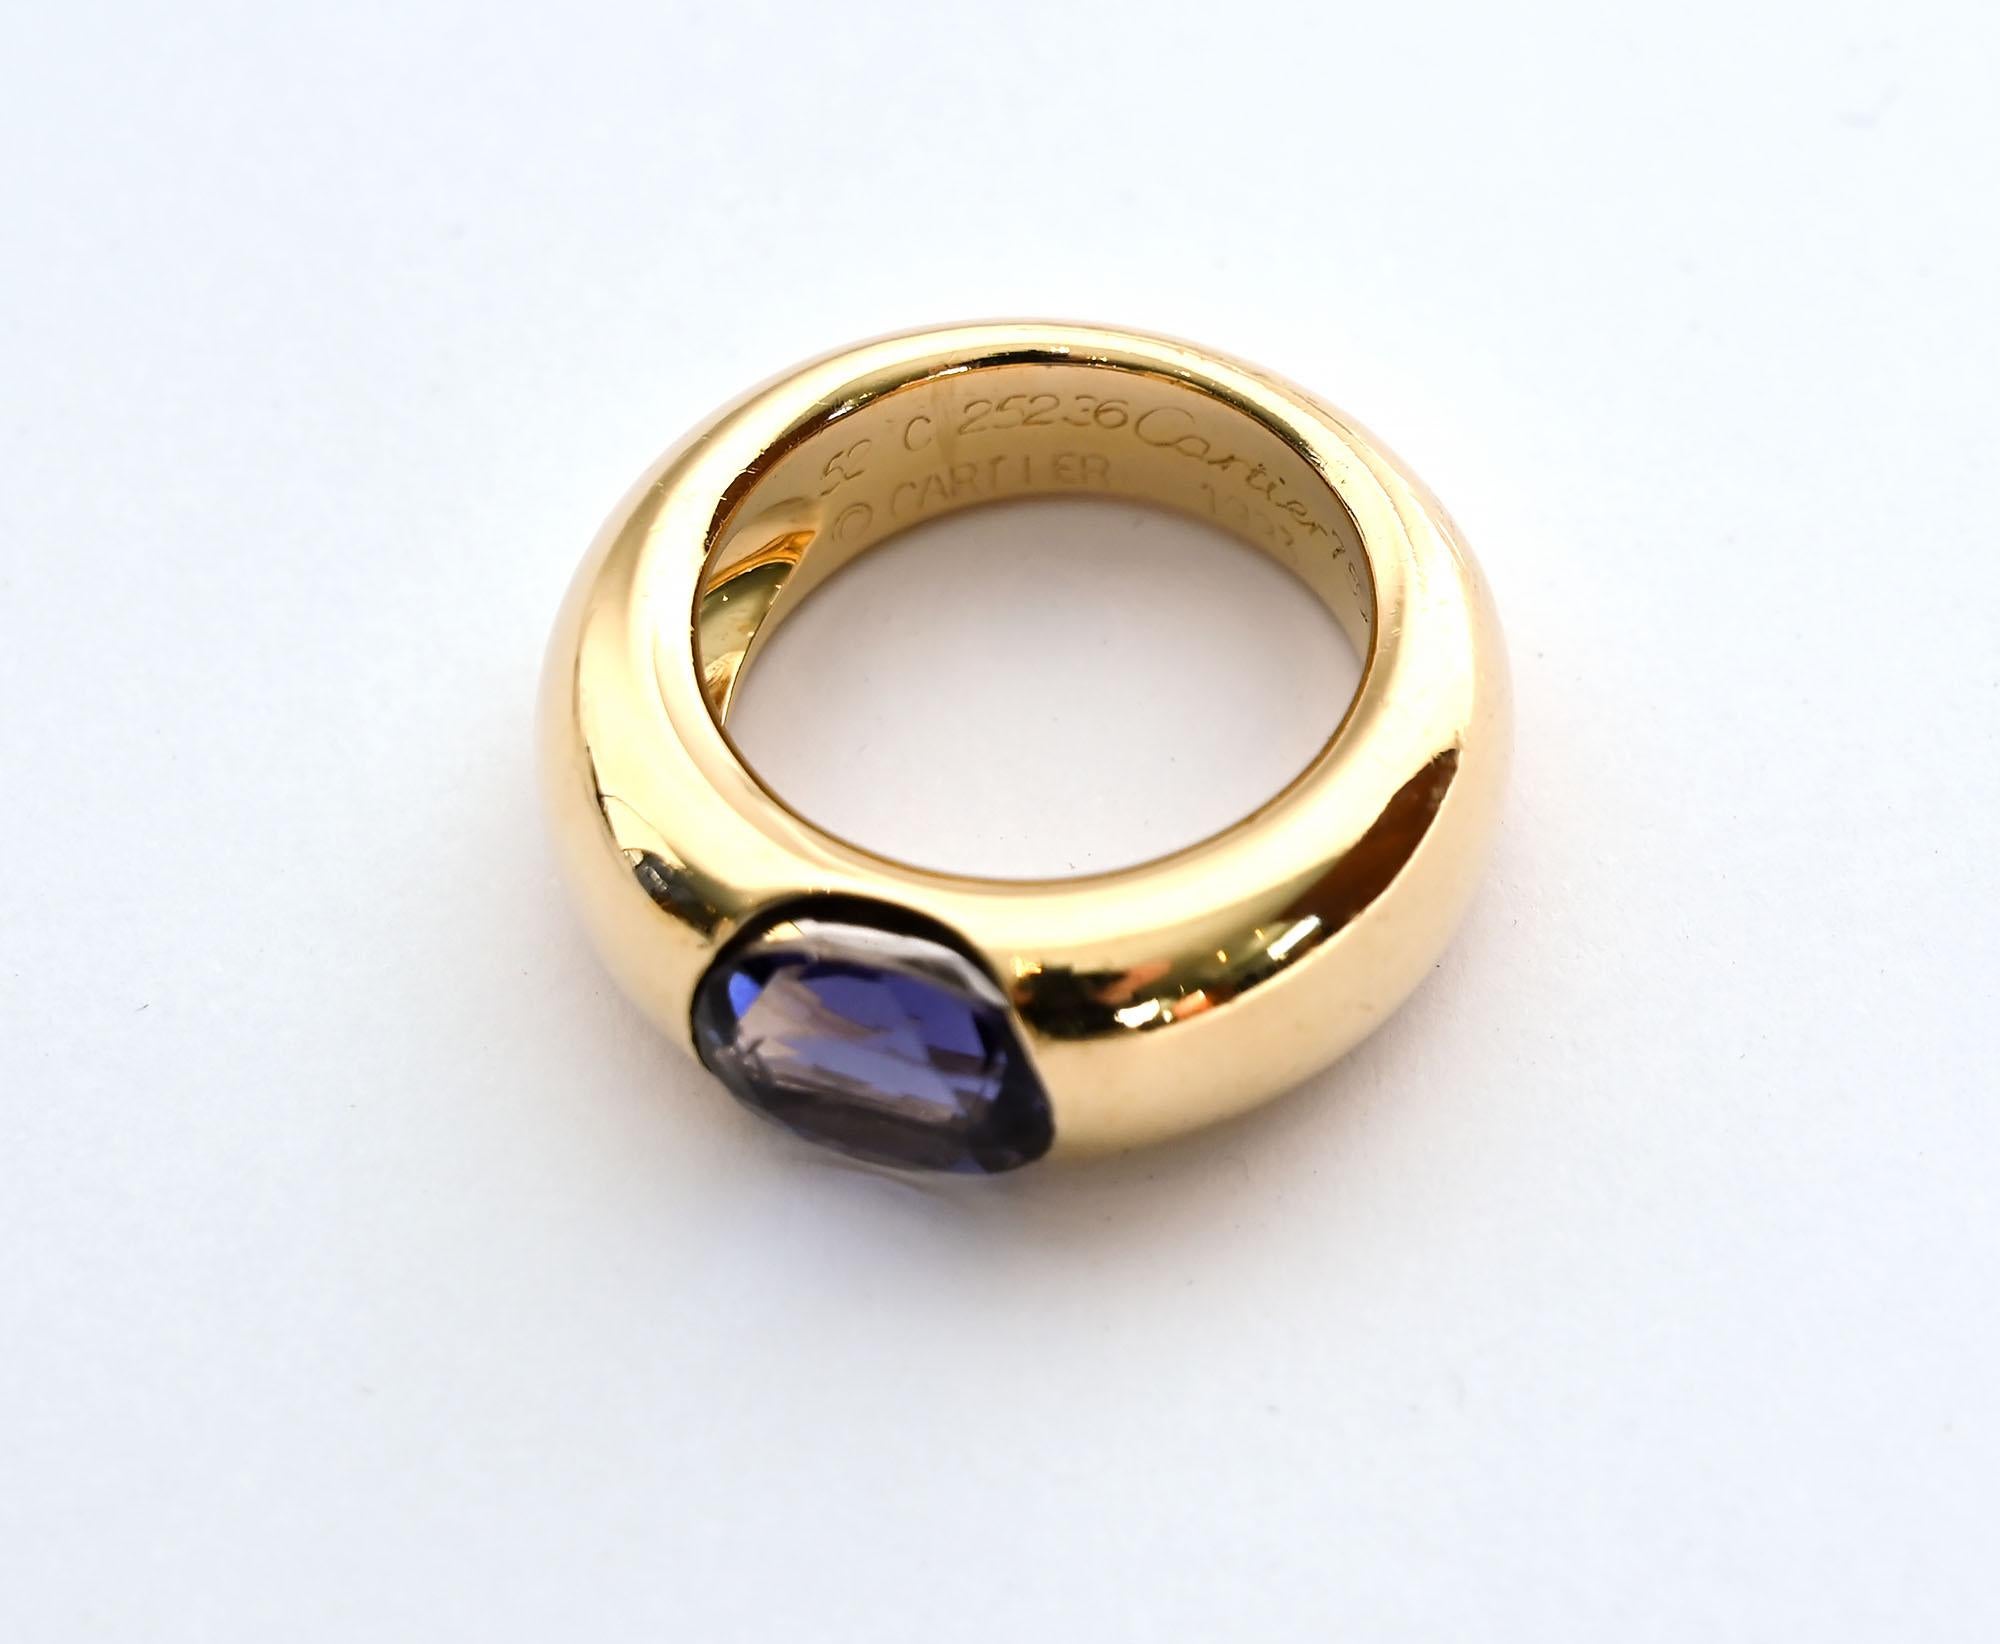 Cartier 18 karat gold ring with a central iolite stone of a beautiful shade of blue. The ring is 3/8